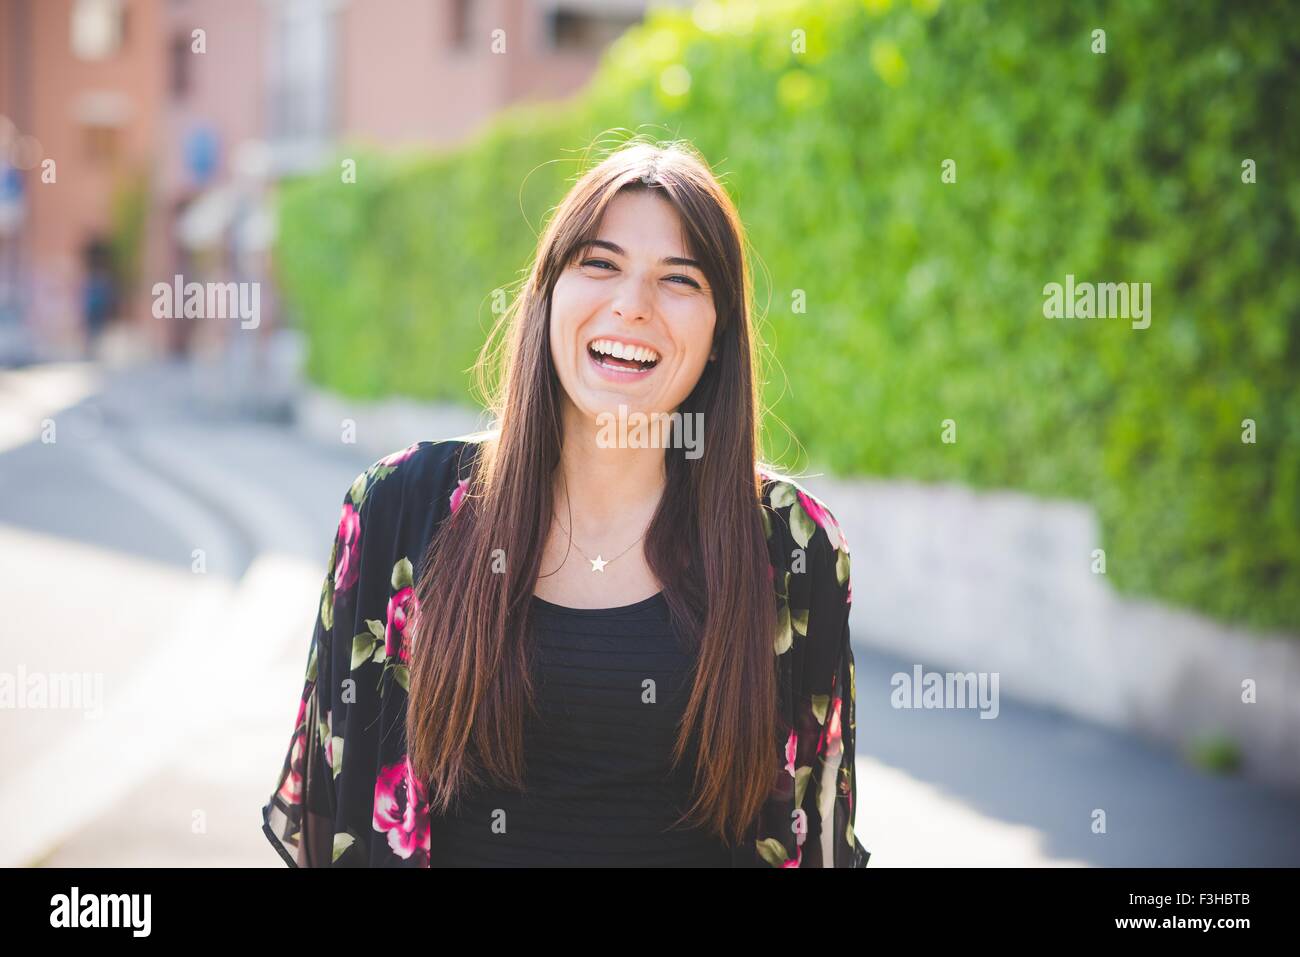 Portrait of young woman with long brown hair laughing Stock Photo